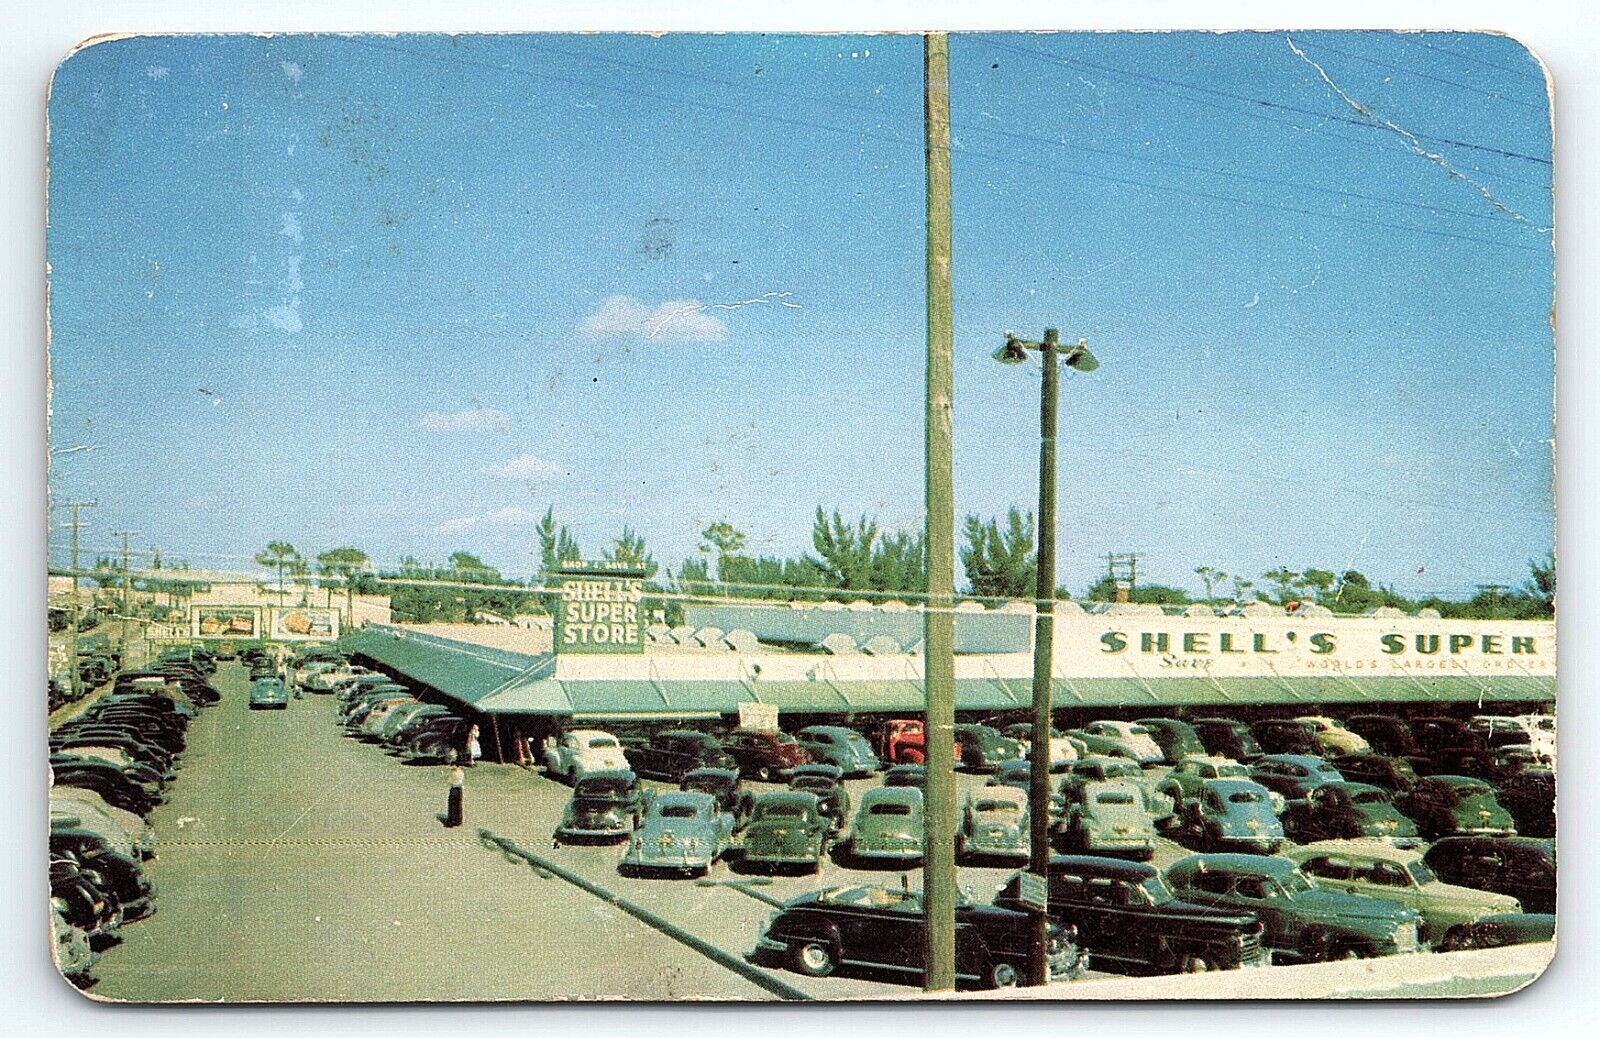 1949 MIAMI FL SHELL'S SUPER STORE WORLD'S LARGEST GROCERY PARKING POSTCARD P3767